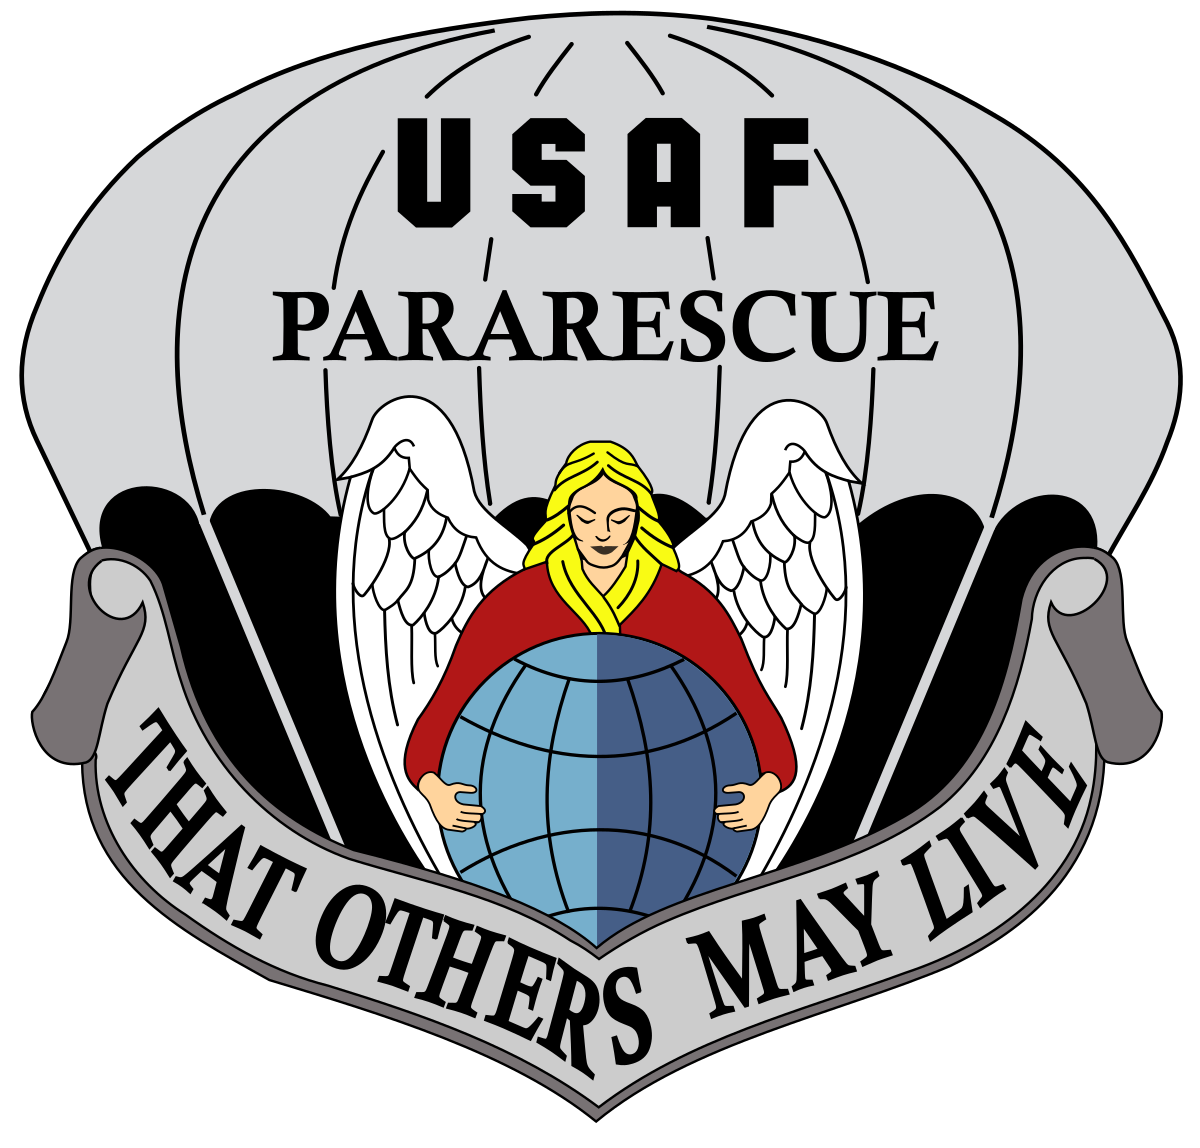 United States Air Force Pararescue Wikipedia